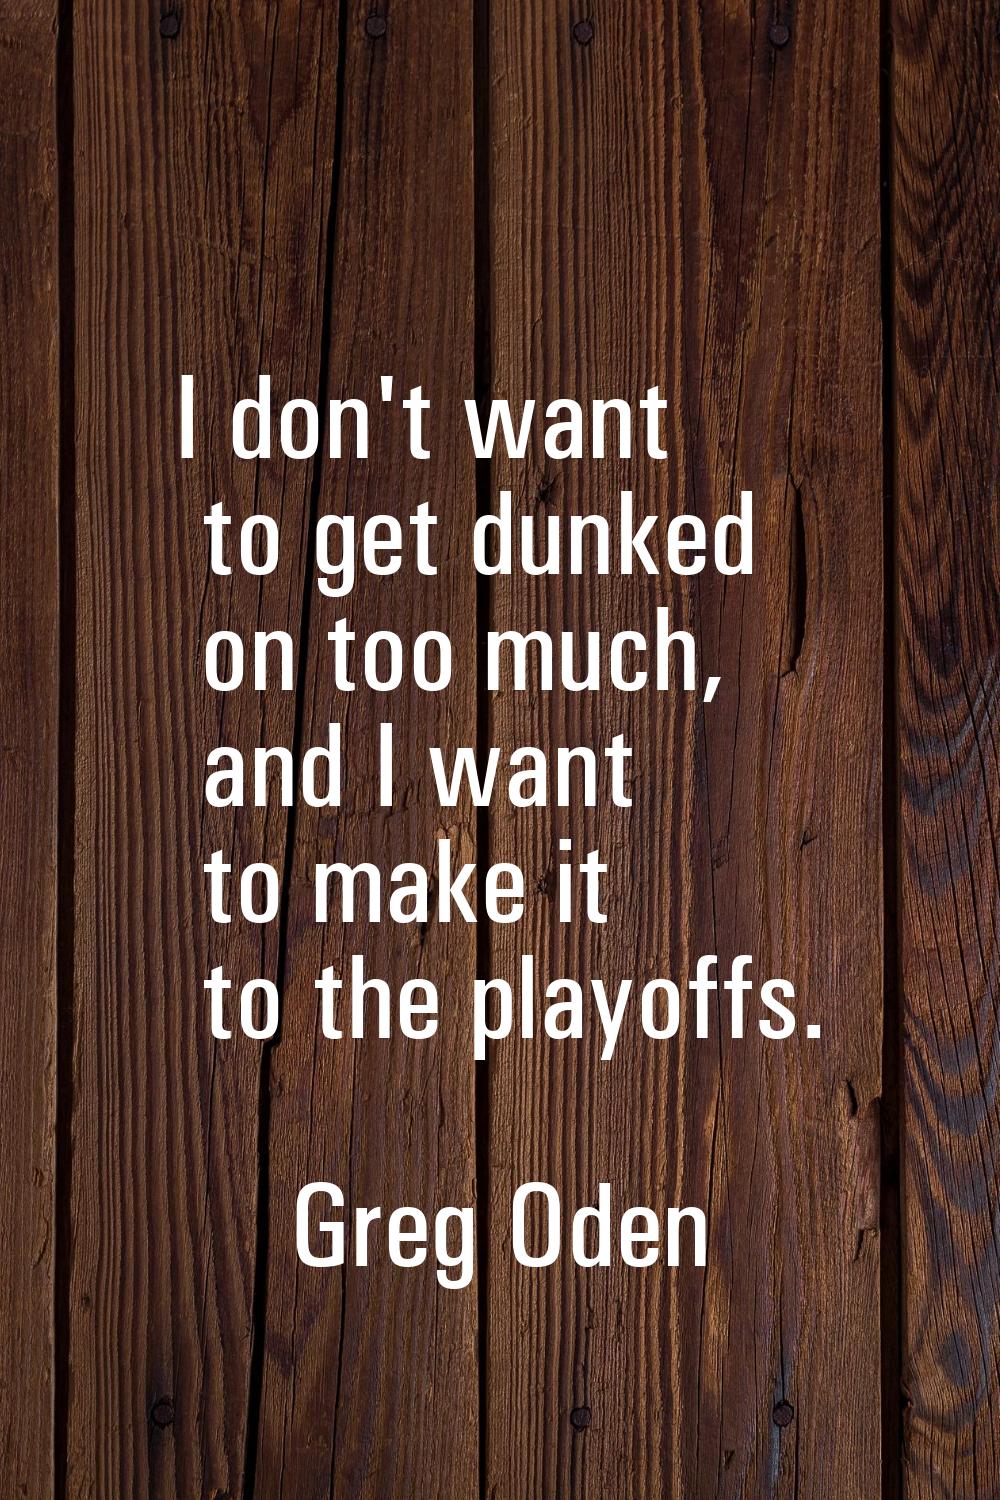 I don't want to get dunked on too much, and I want to make it to the playoffs.